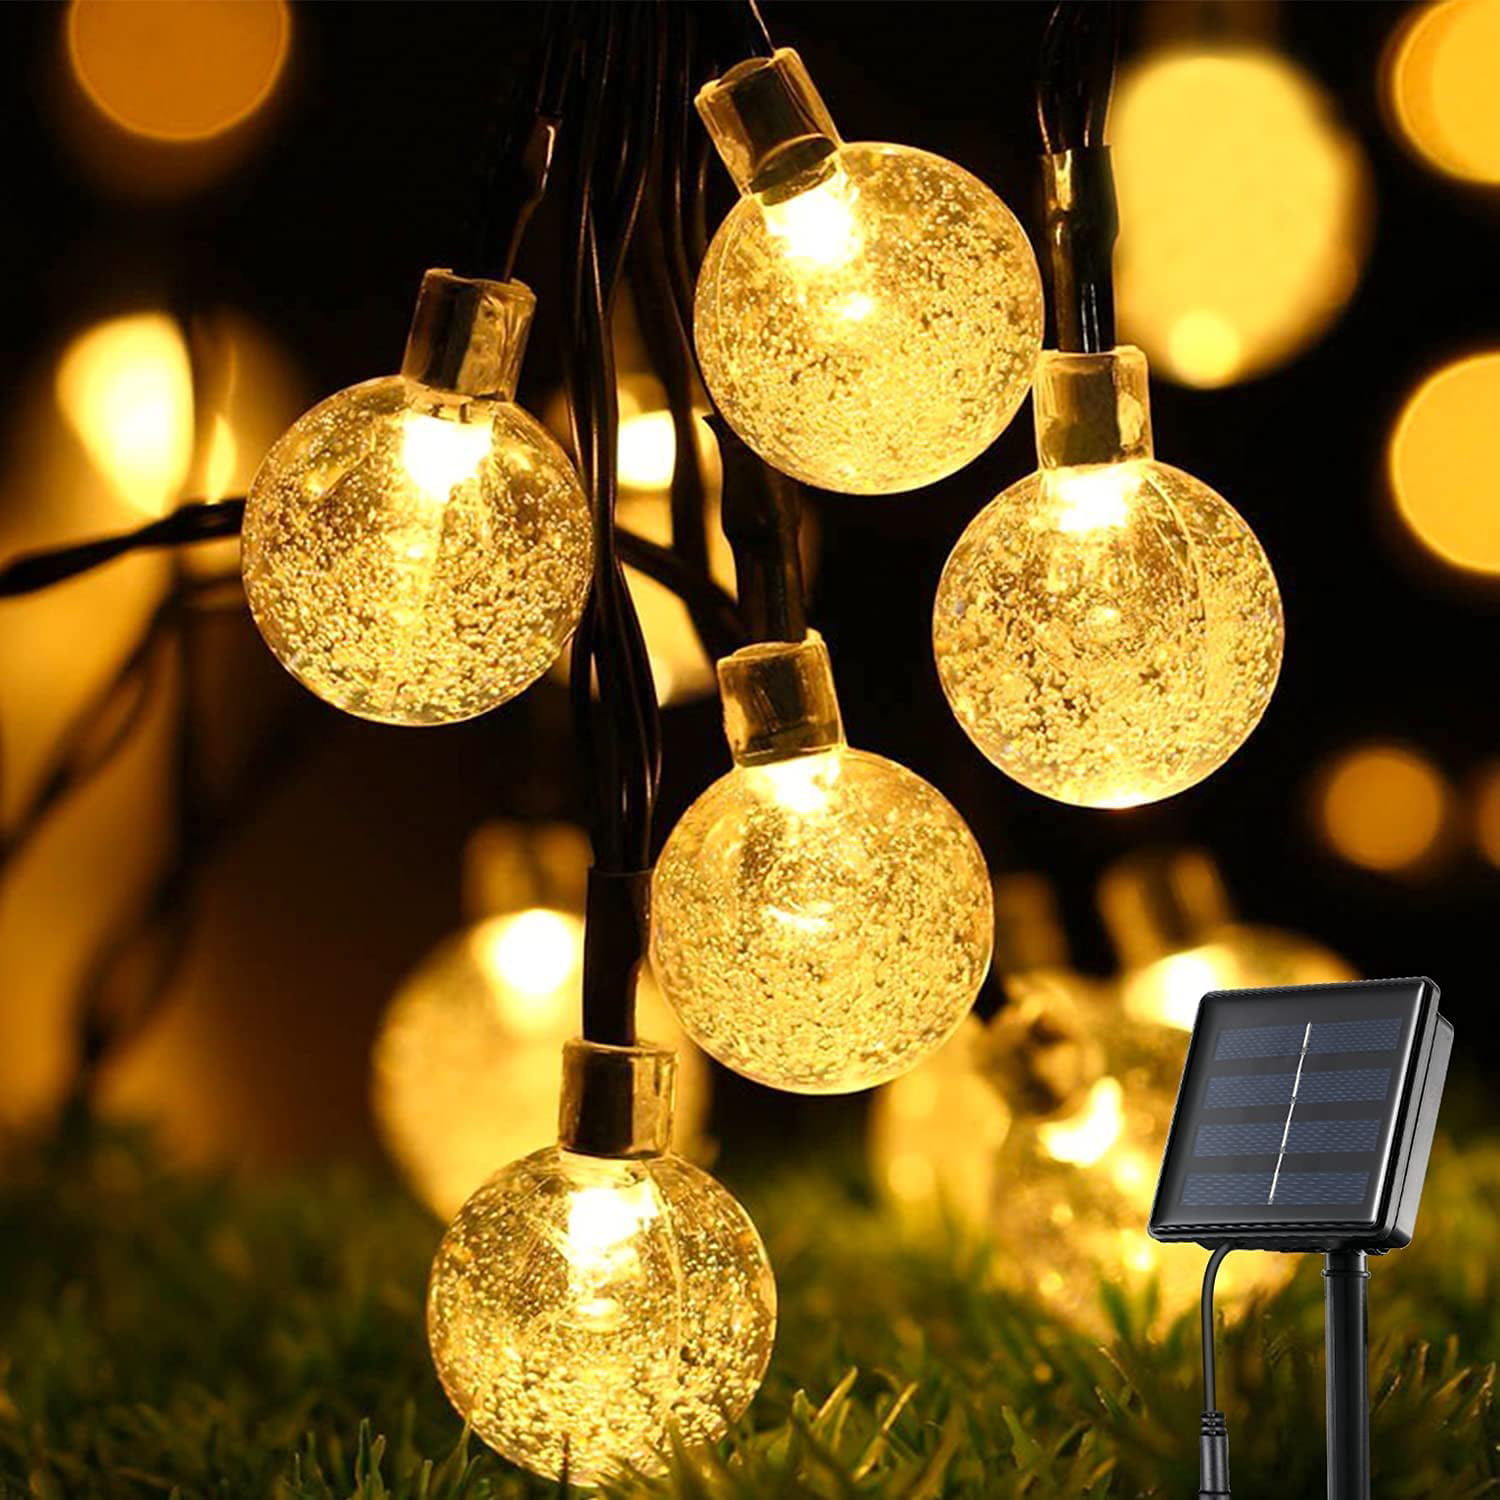 23FT 50LED Solar Power Fairy Lights String Lamps Party Decor Garden Outdoor Free